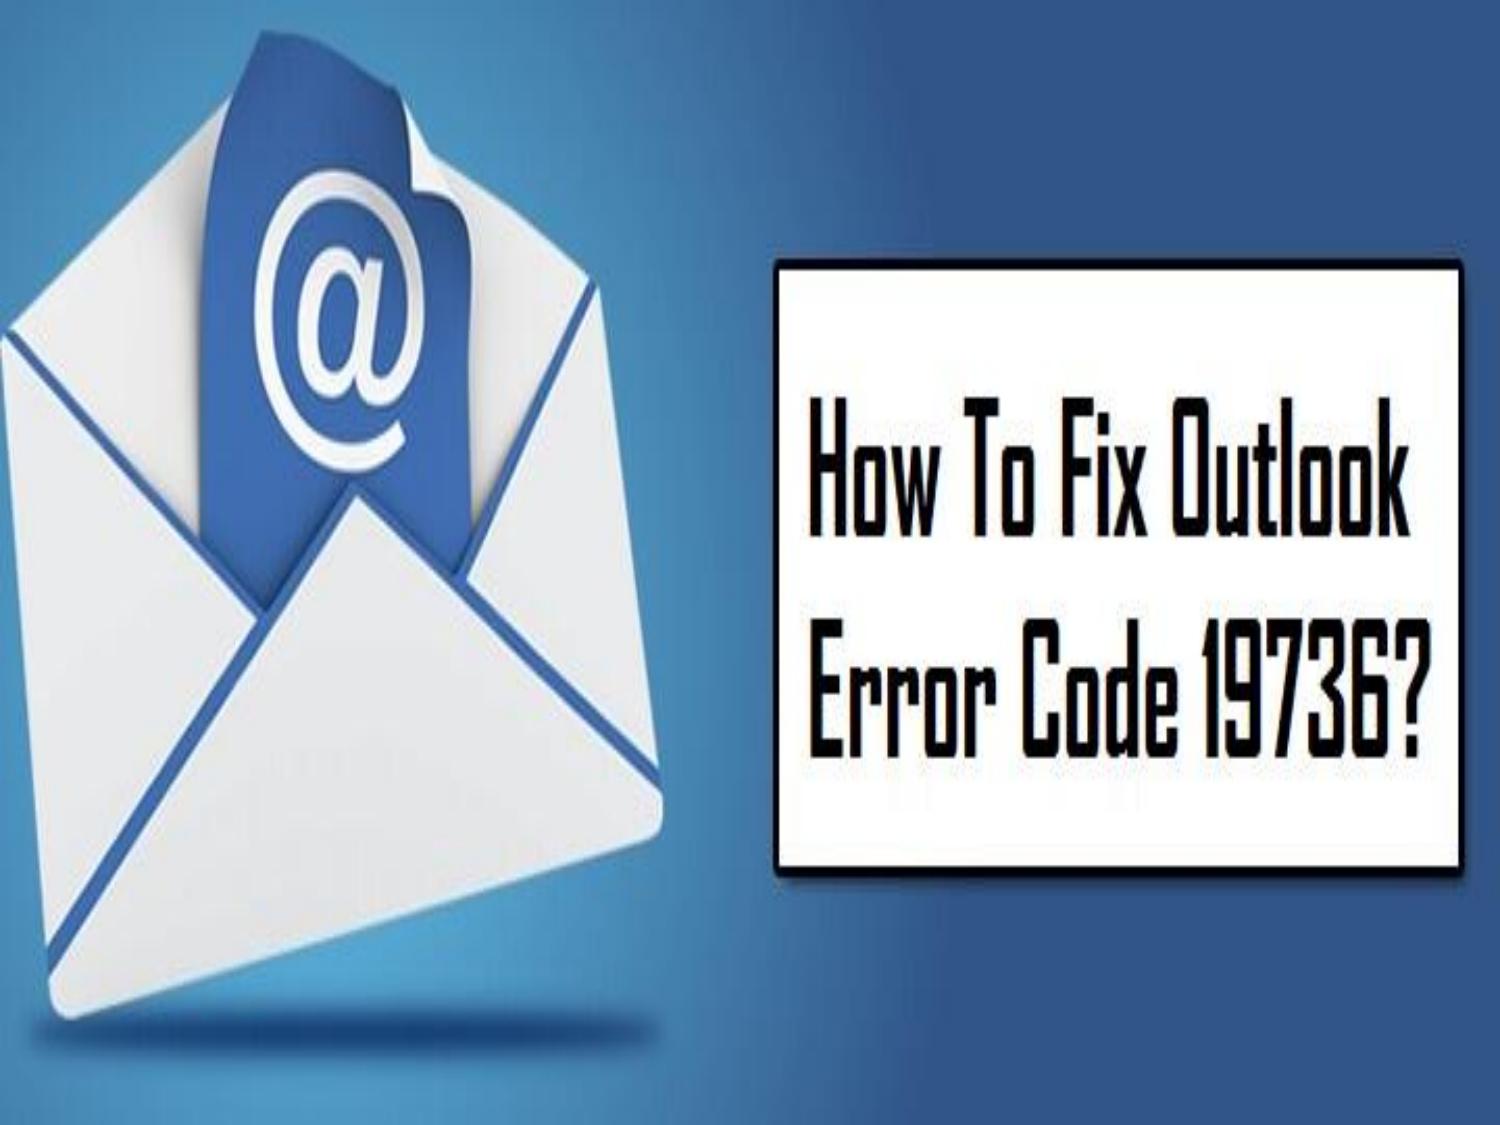 outlook for mac 2016 could not synchronize record error -19703